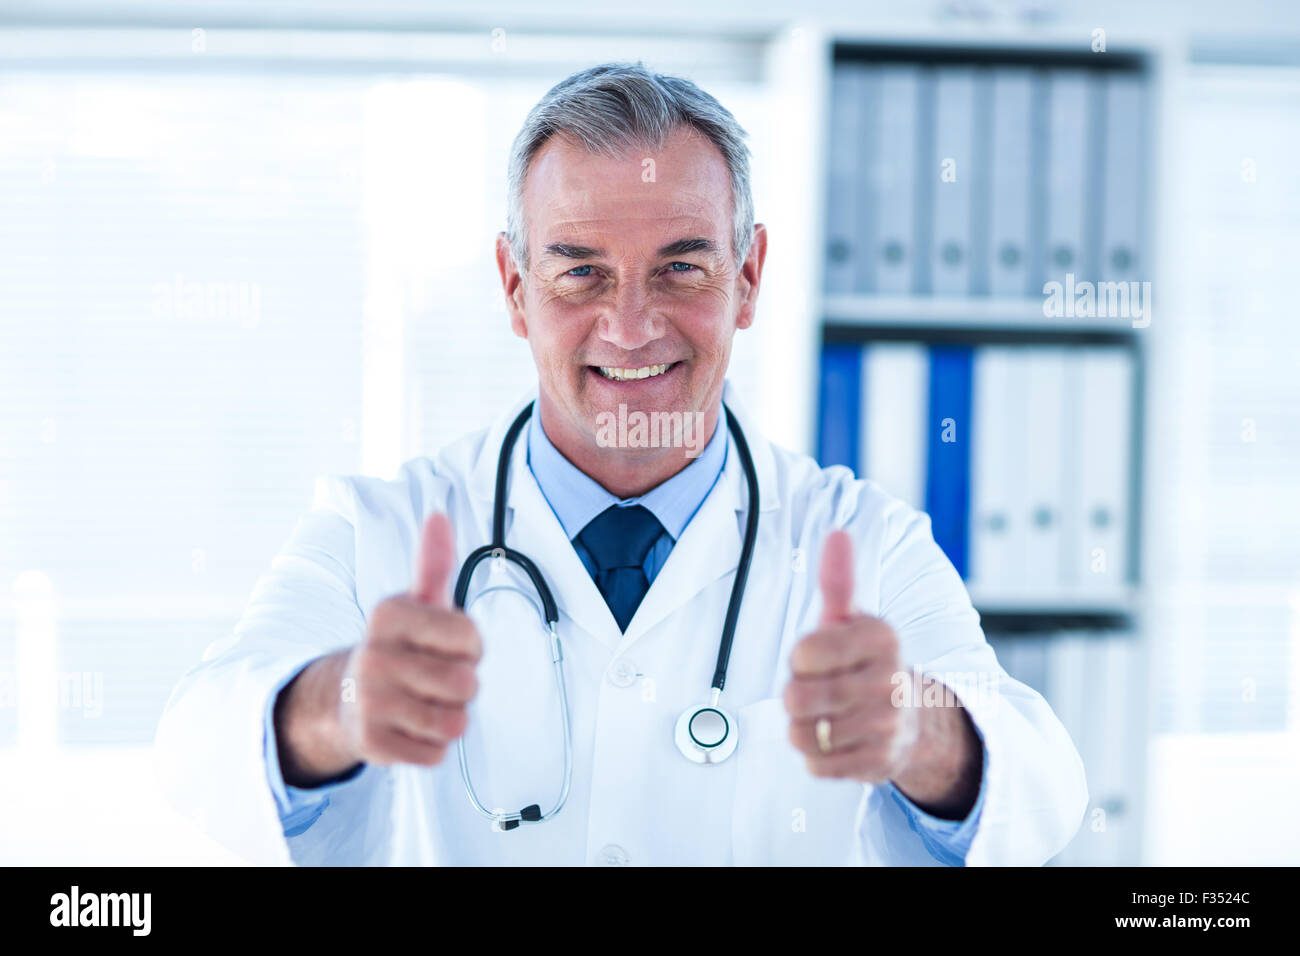 Portrait of doctor showing thumps up sign in clinic Stock Photo